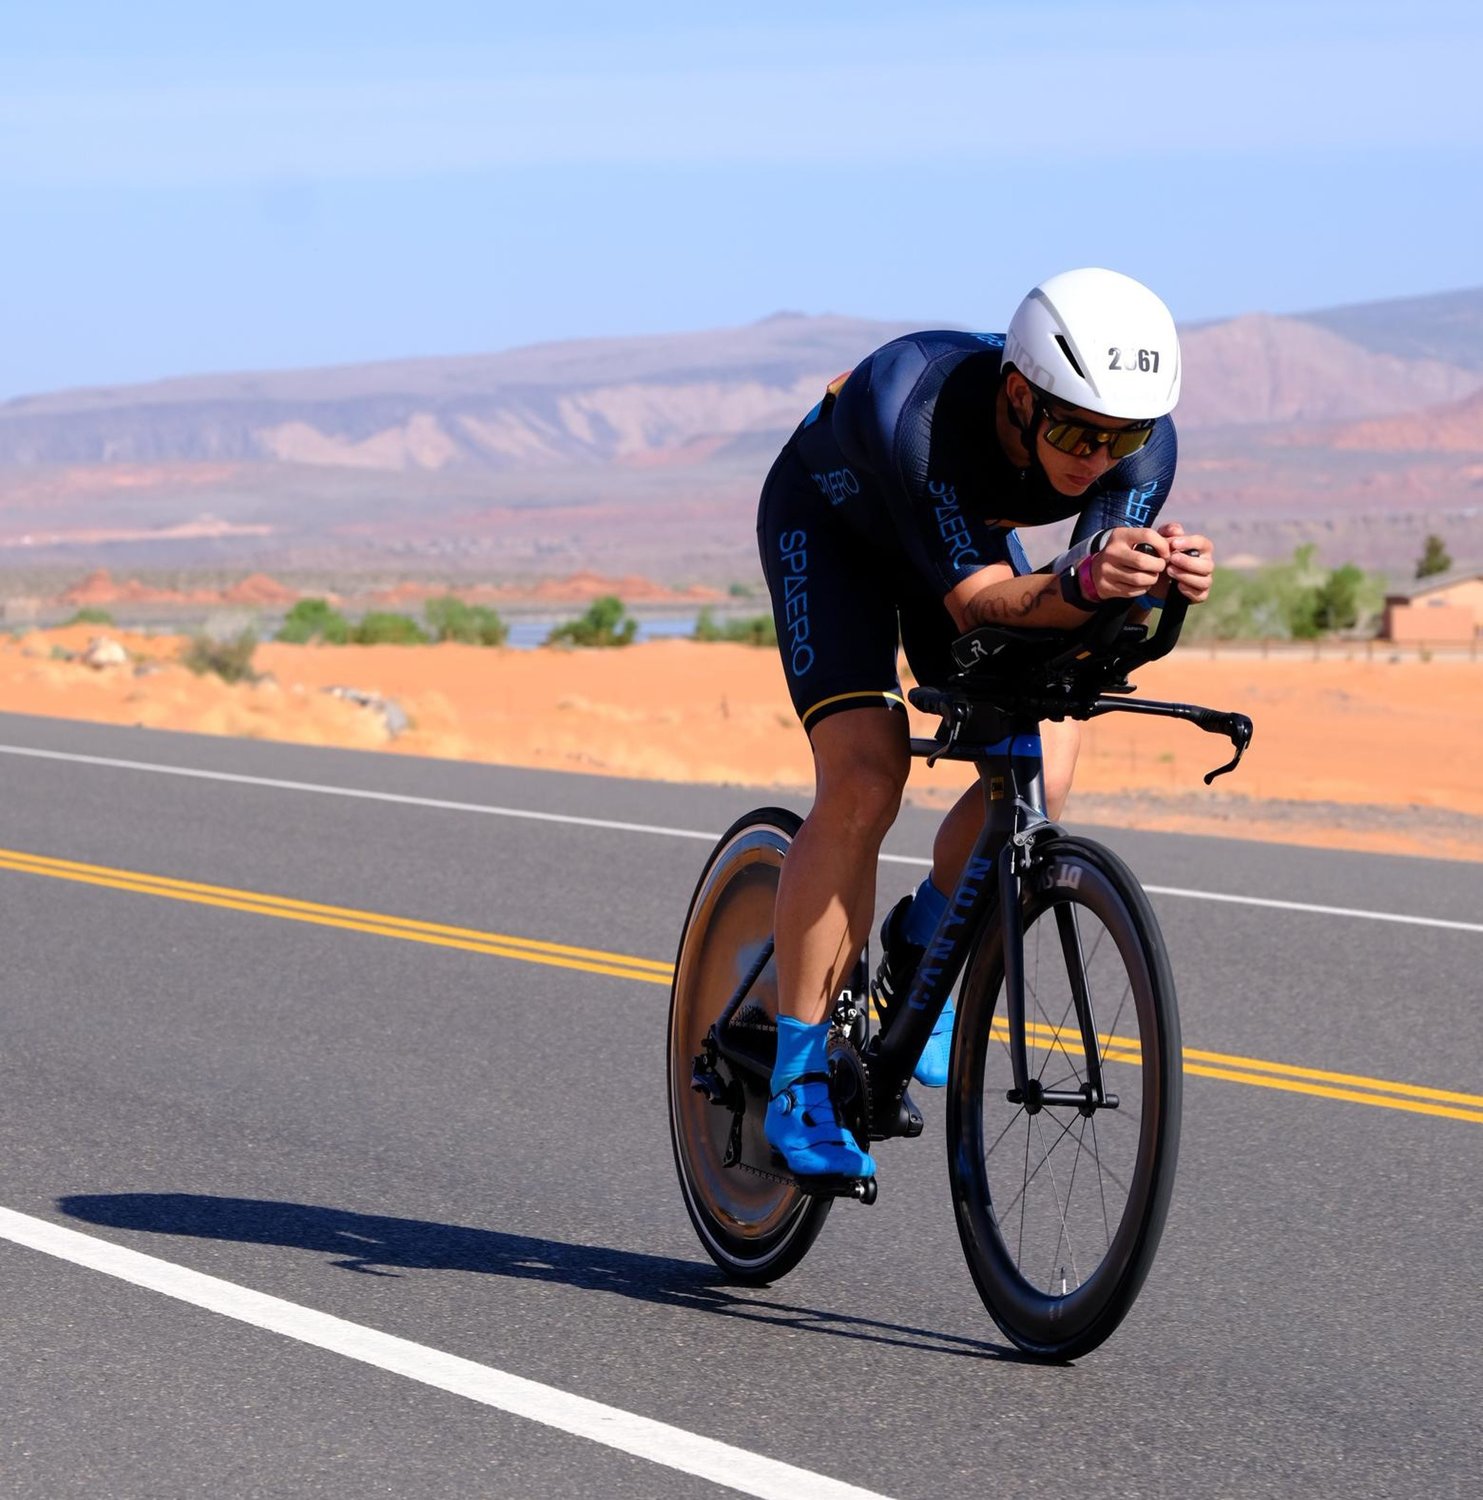 Peyton Thompson cycles along the desert route in St. George, Utah, during the 2021 Ironman World Championship.